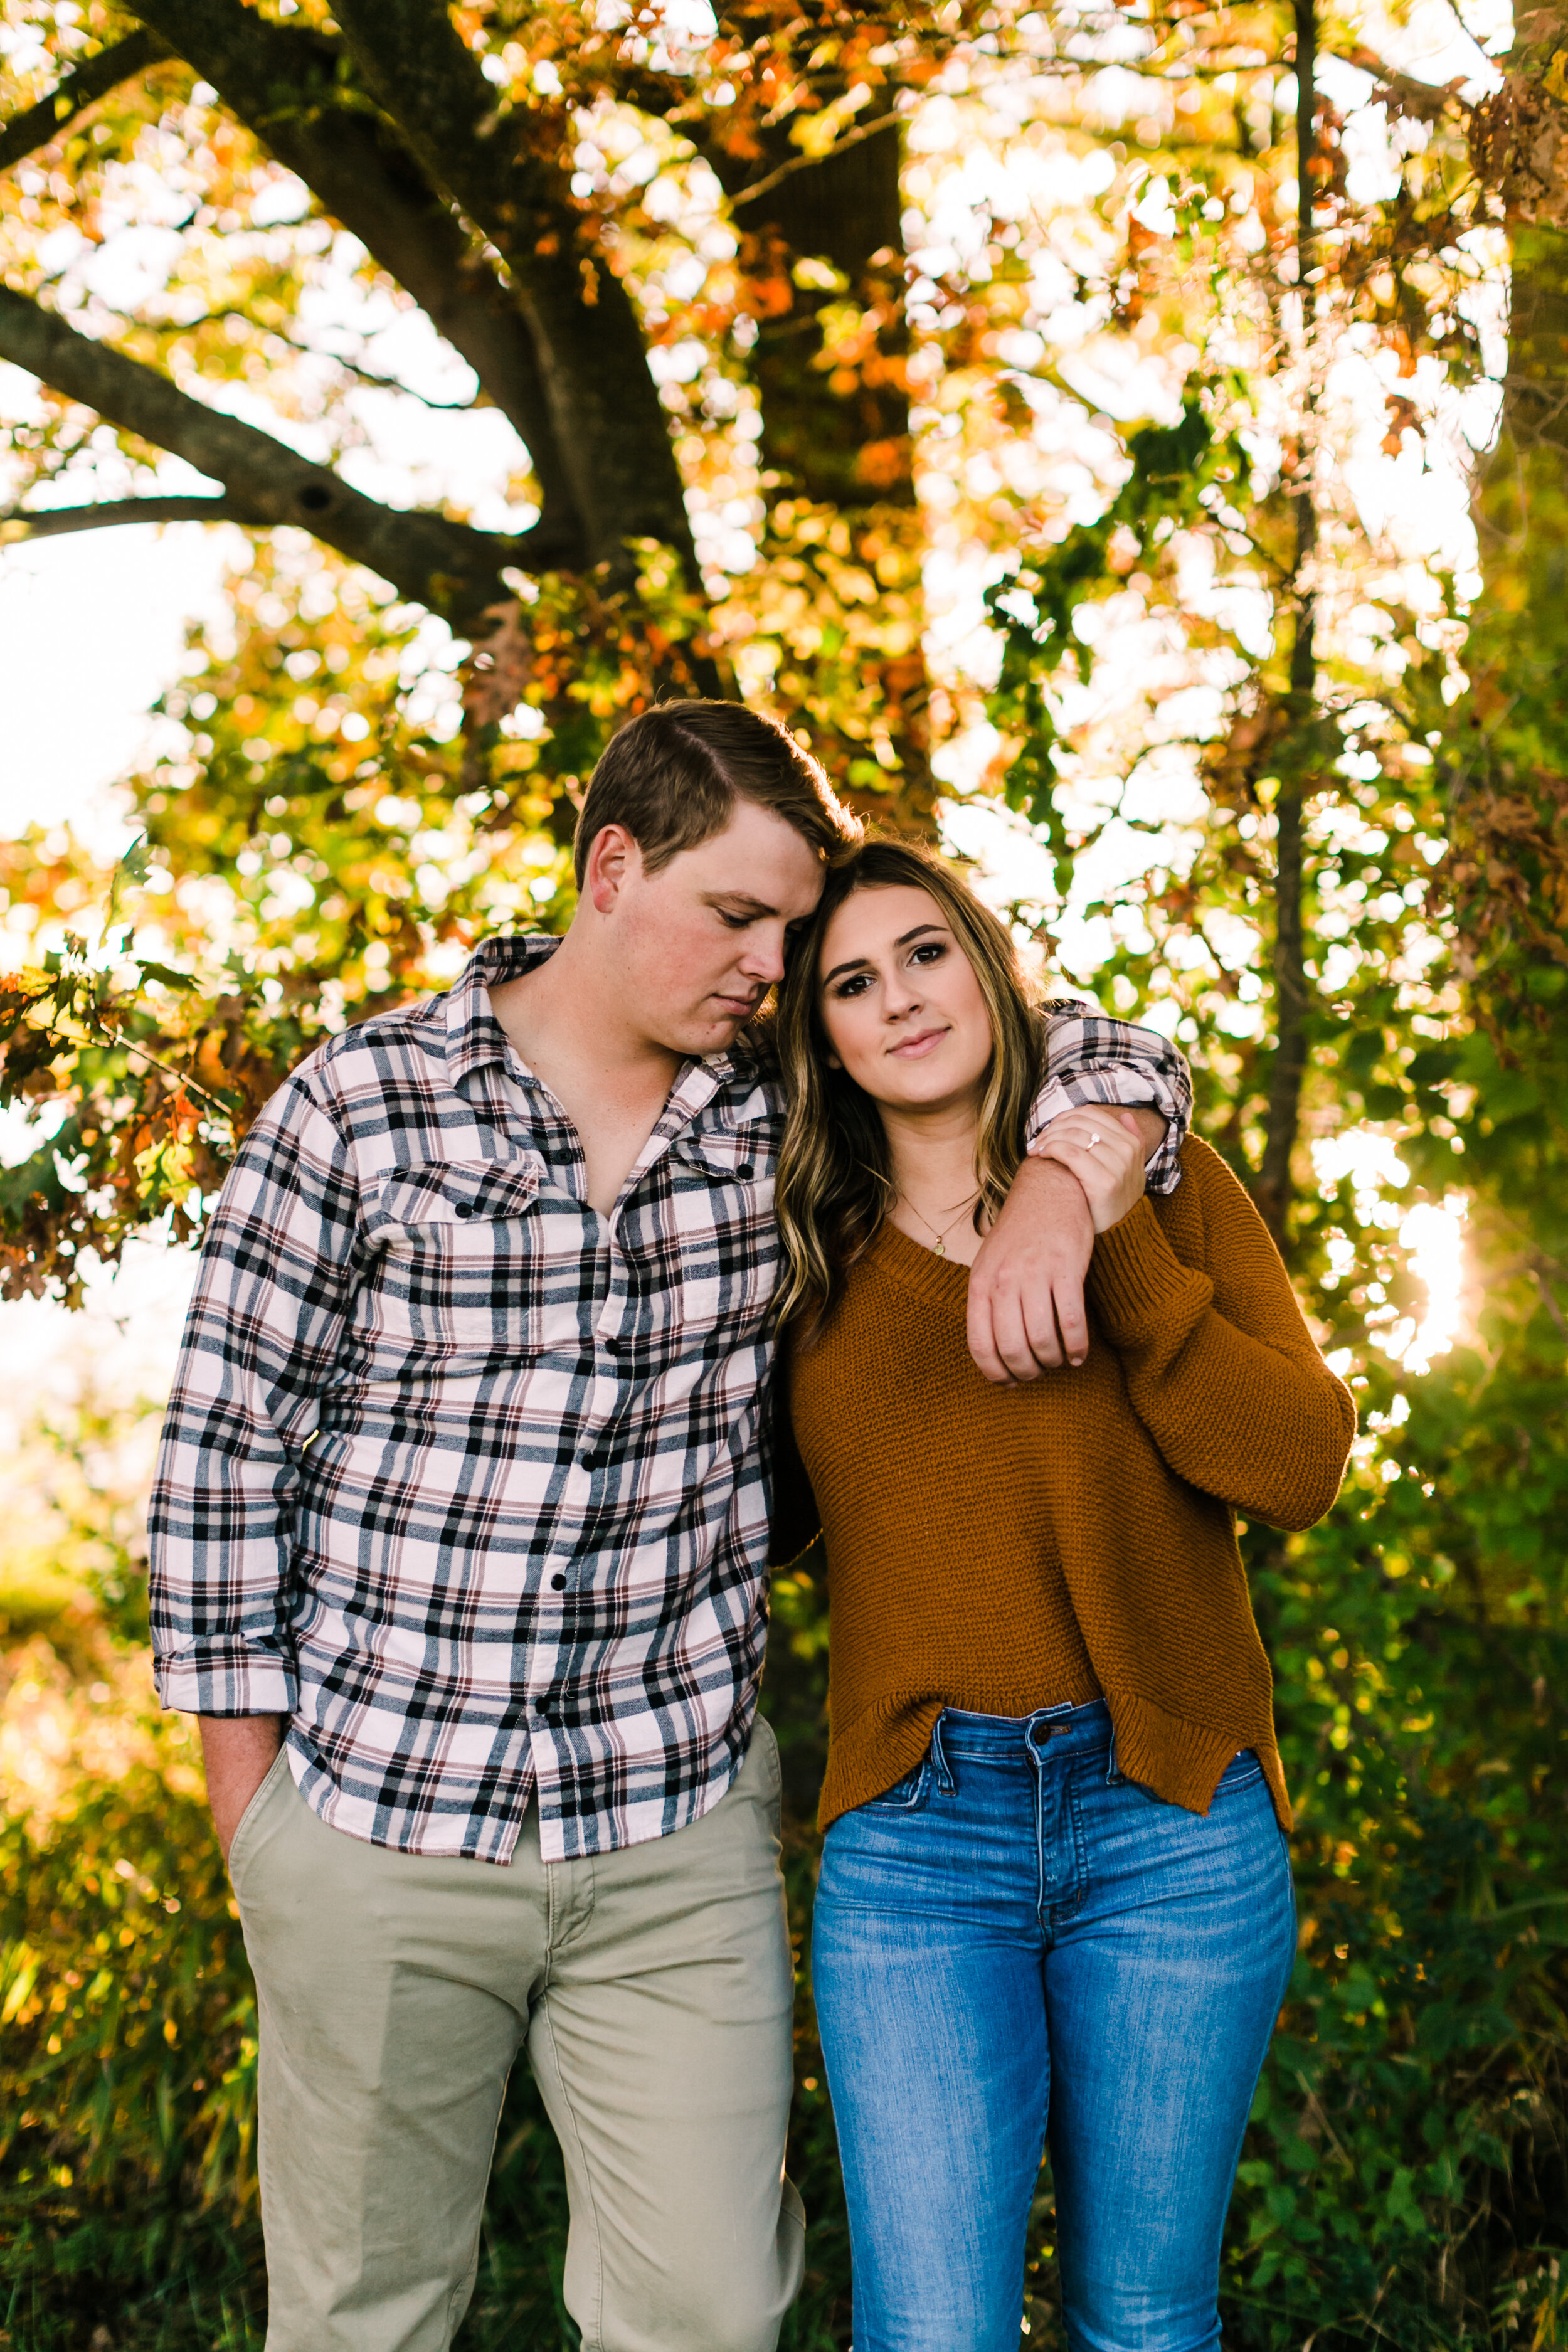 Tennessee+Fall+Engagement+Photos+Puppy (42 of 63).jpg